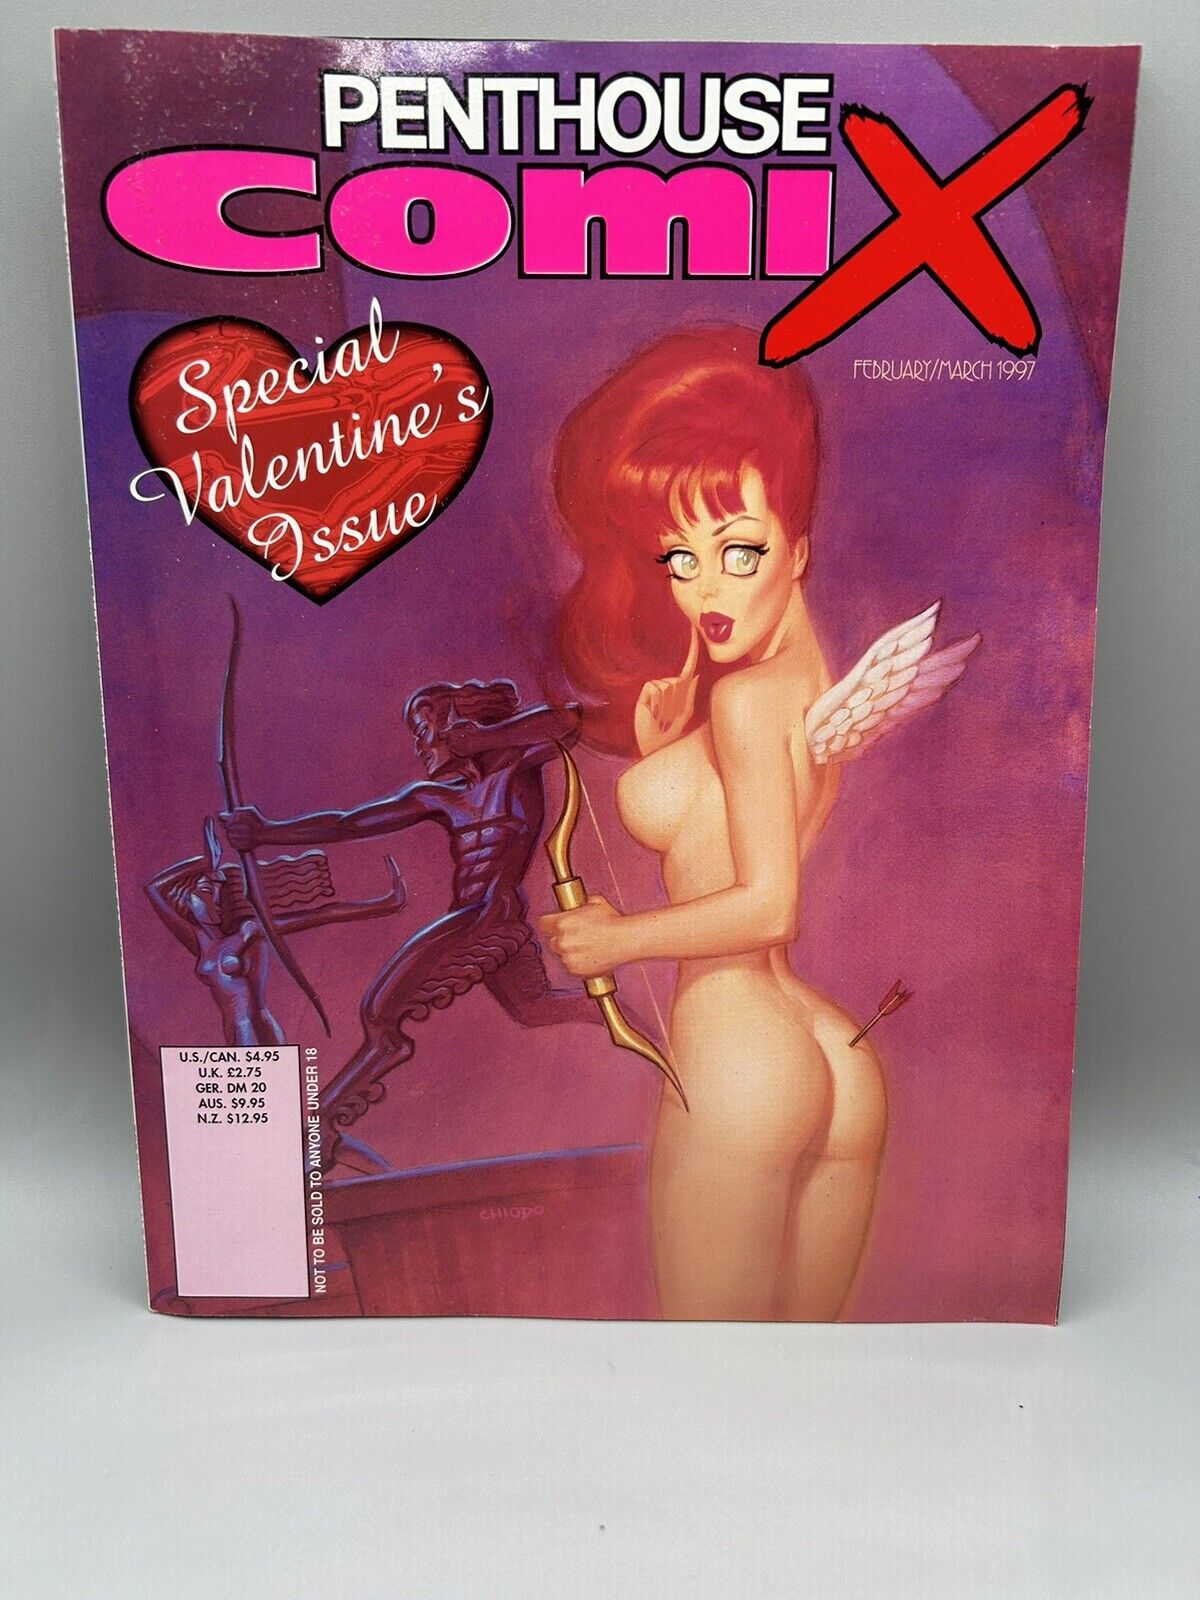 Penthouse Comix Vol 2 No 20 Valentine's issue Feb March 1997